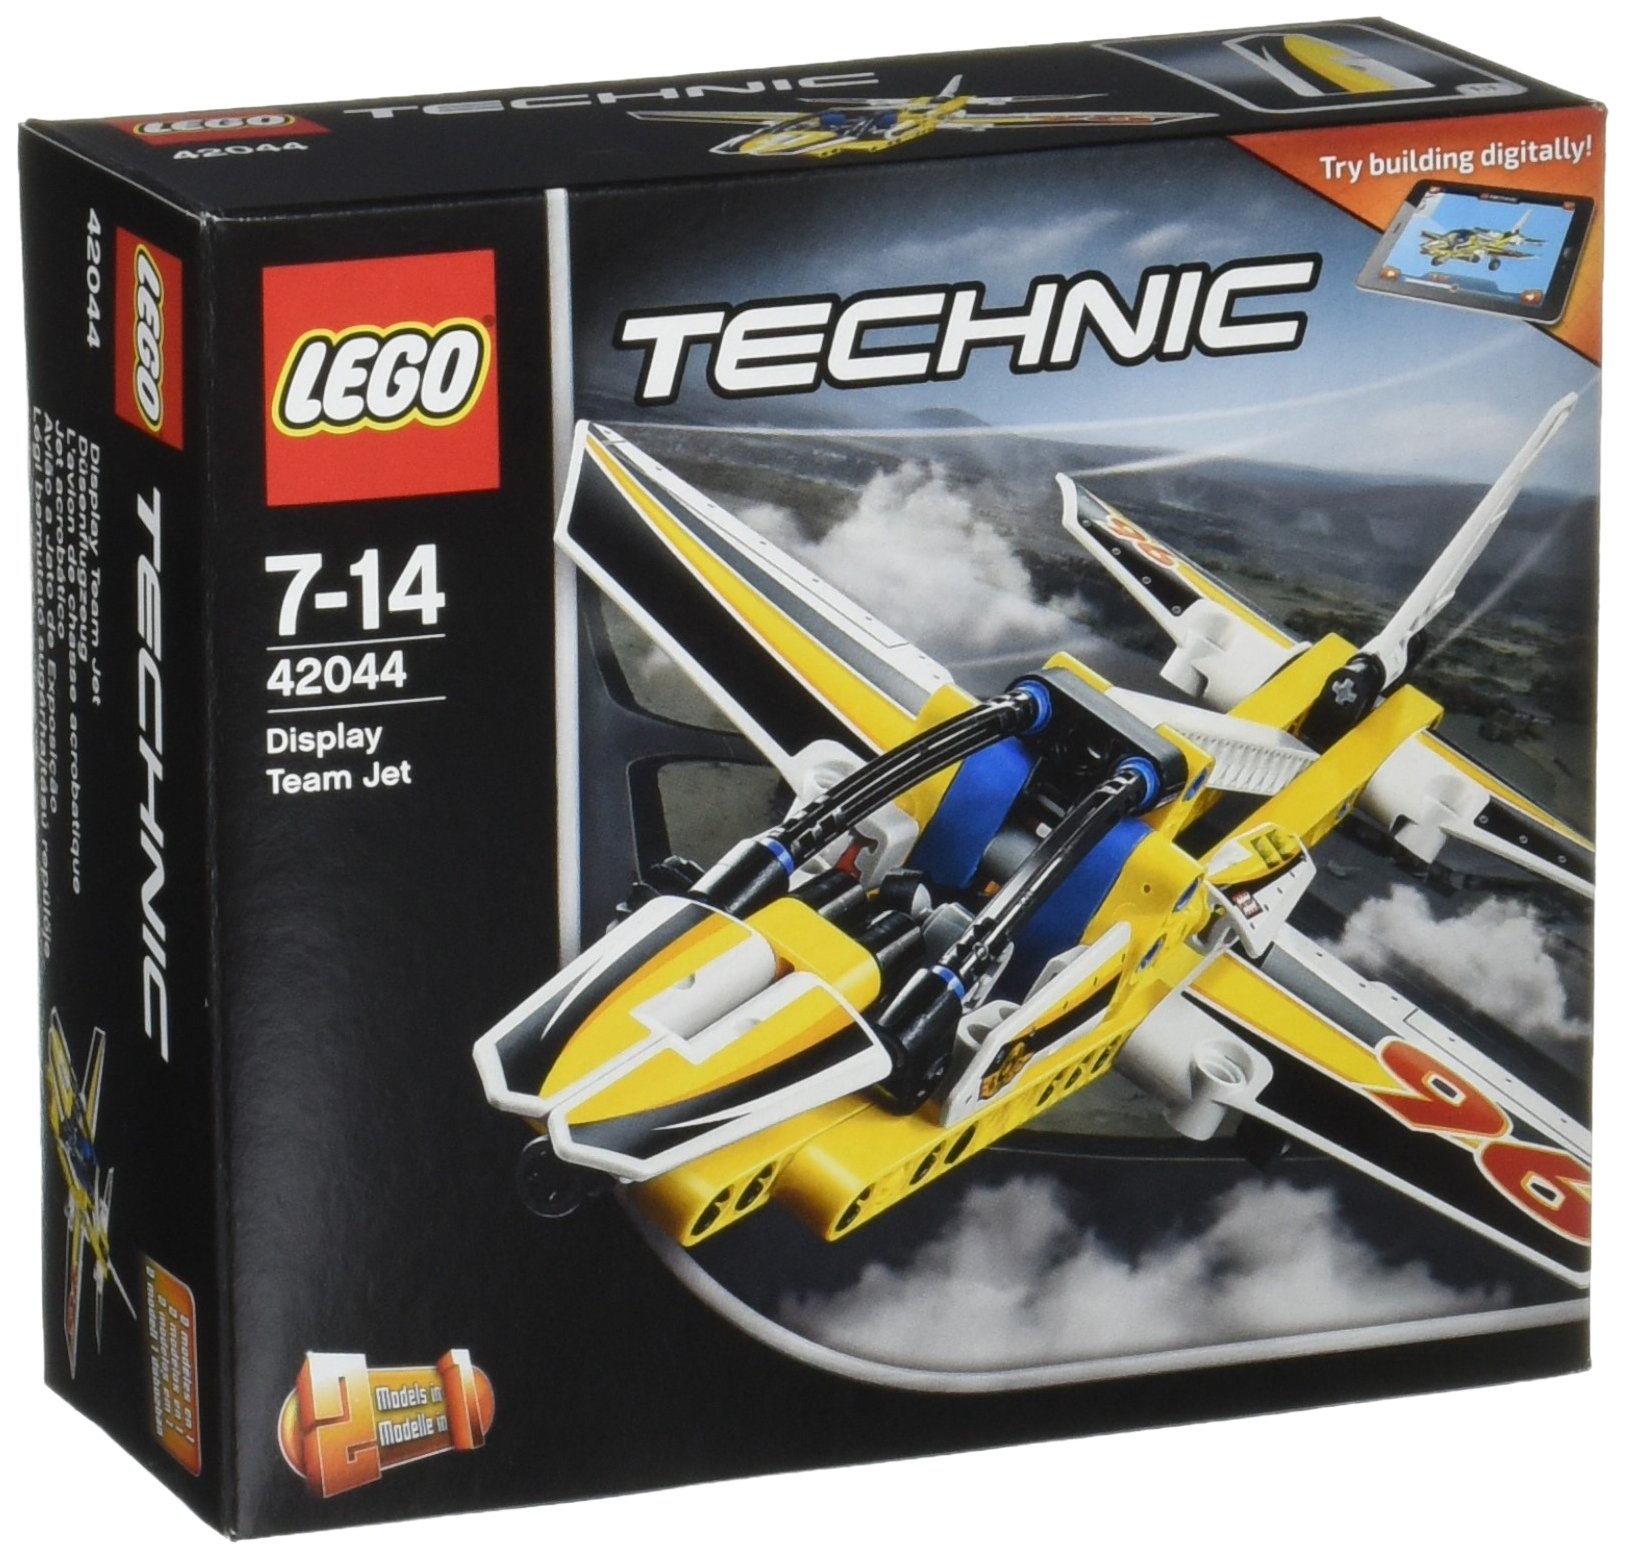 LEGO Technic Display Team Jet Perform Supersonic Aerial Maneuvers by LEGO